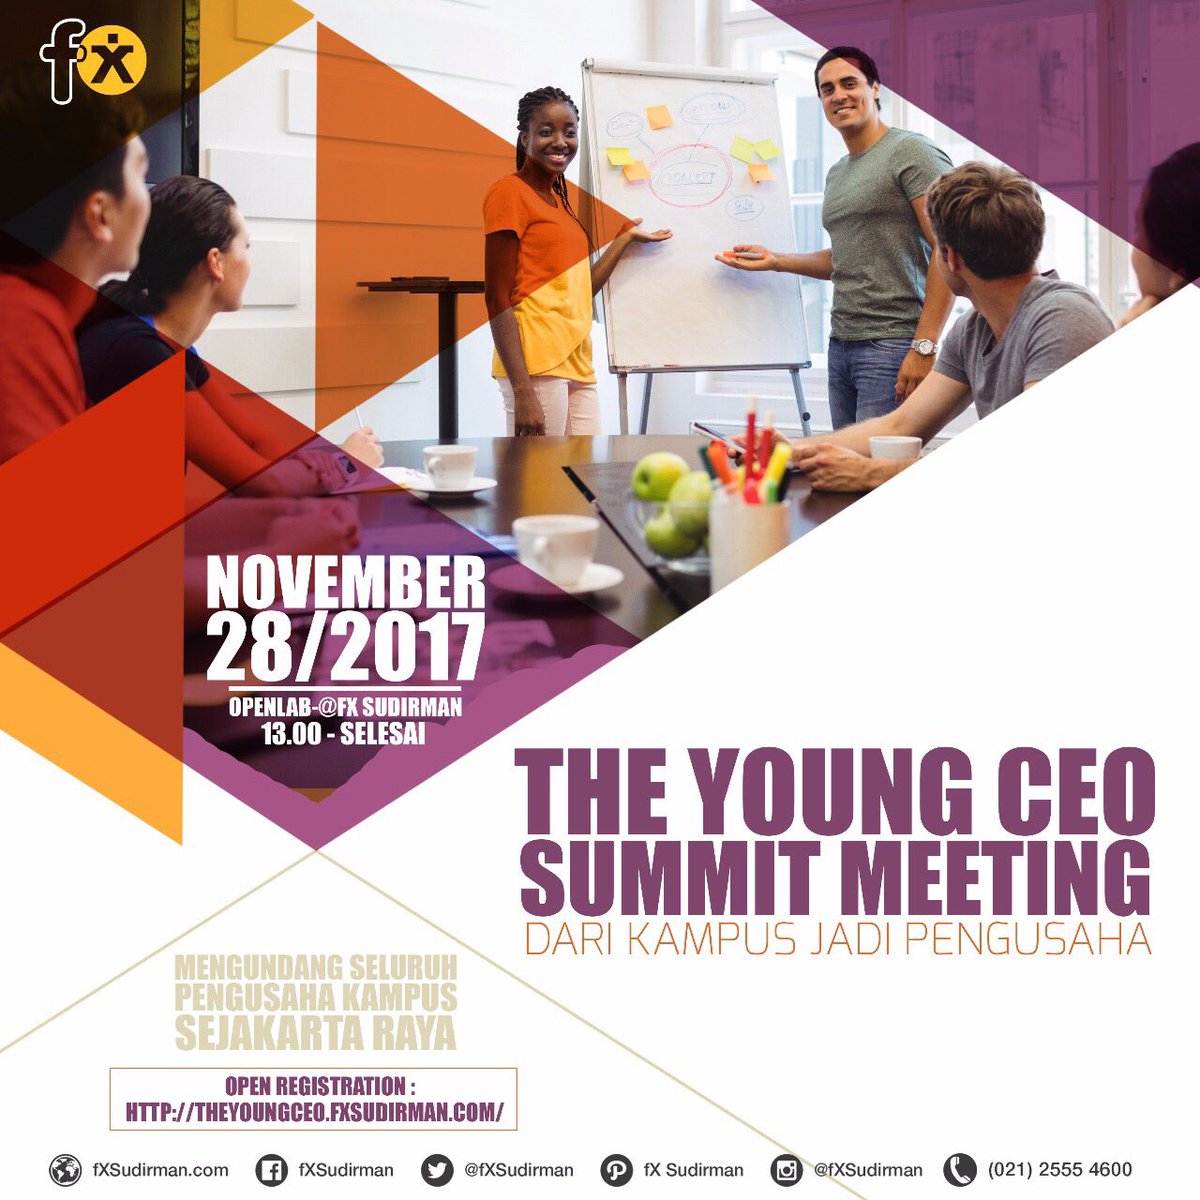 THE YOUNG CEO SUMMIT MEETING 2017